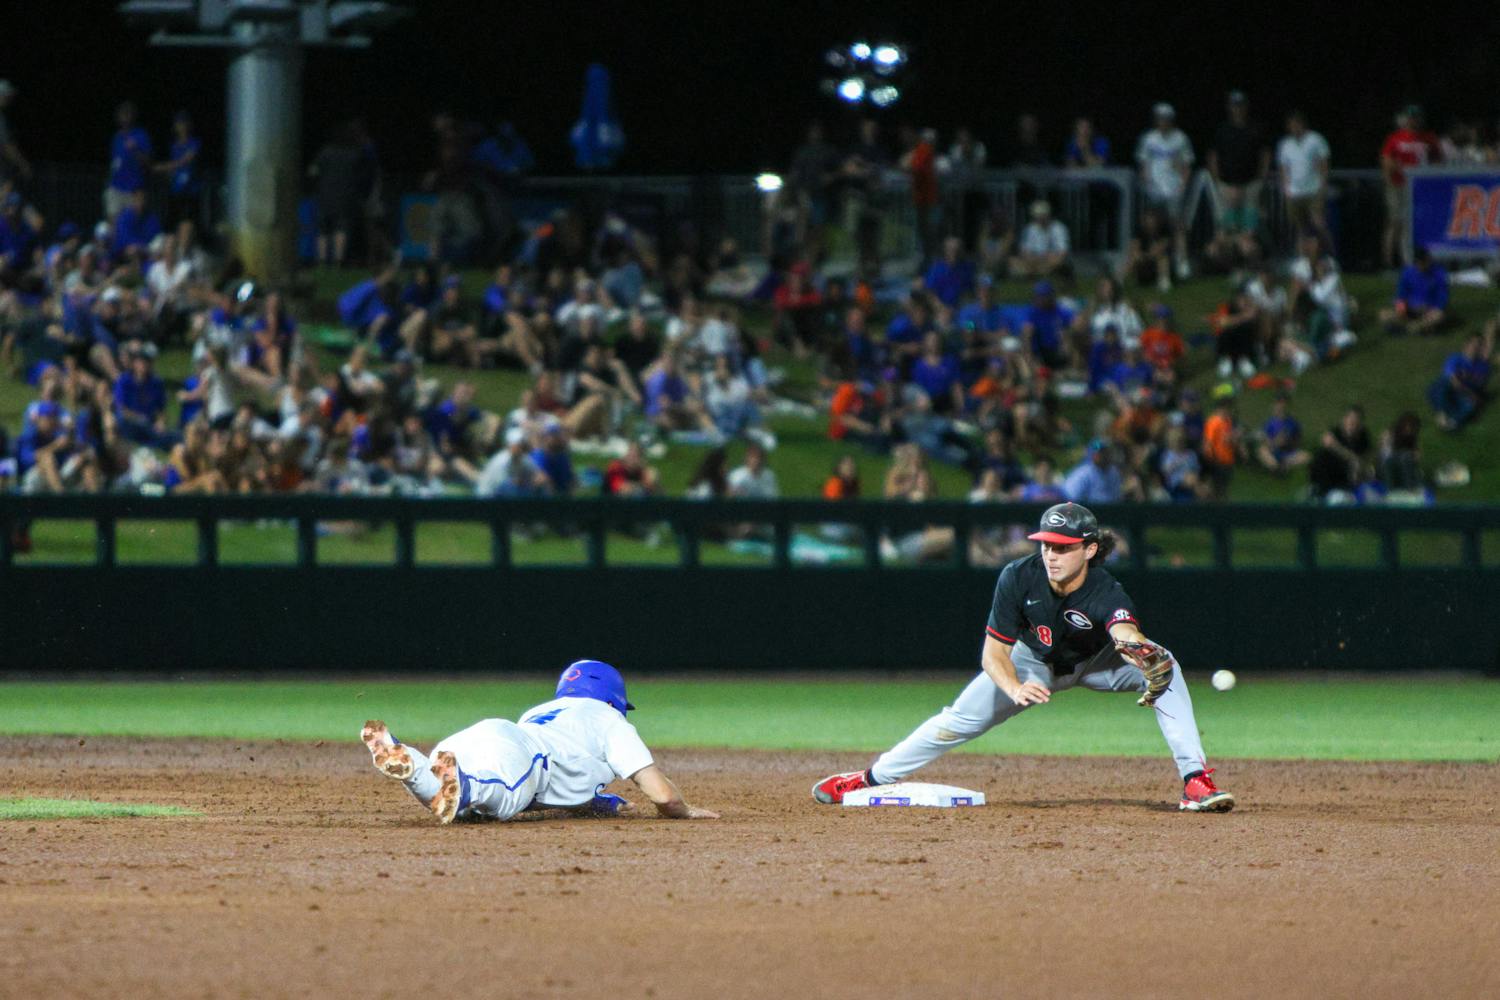 A Florida player slides into second base in the Gators' 13-11 loss to the Georgia Bulldogs on Friday, April 14, 2023.